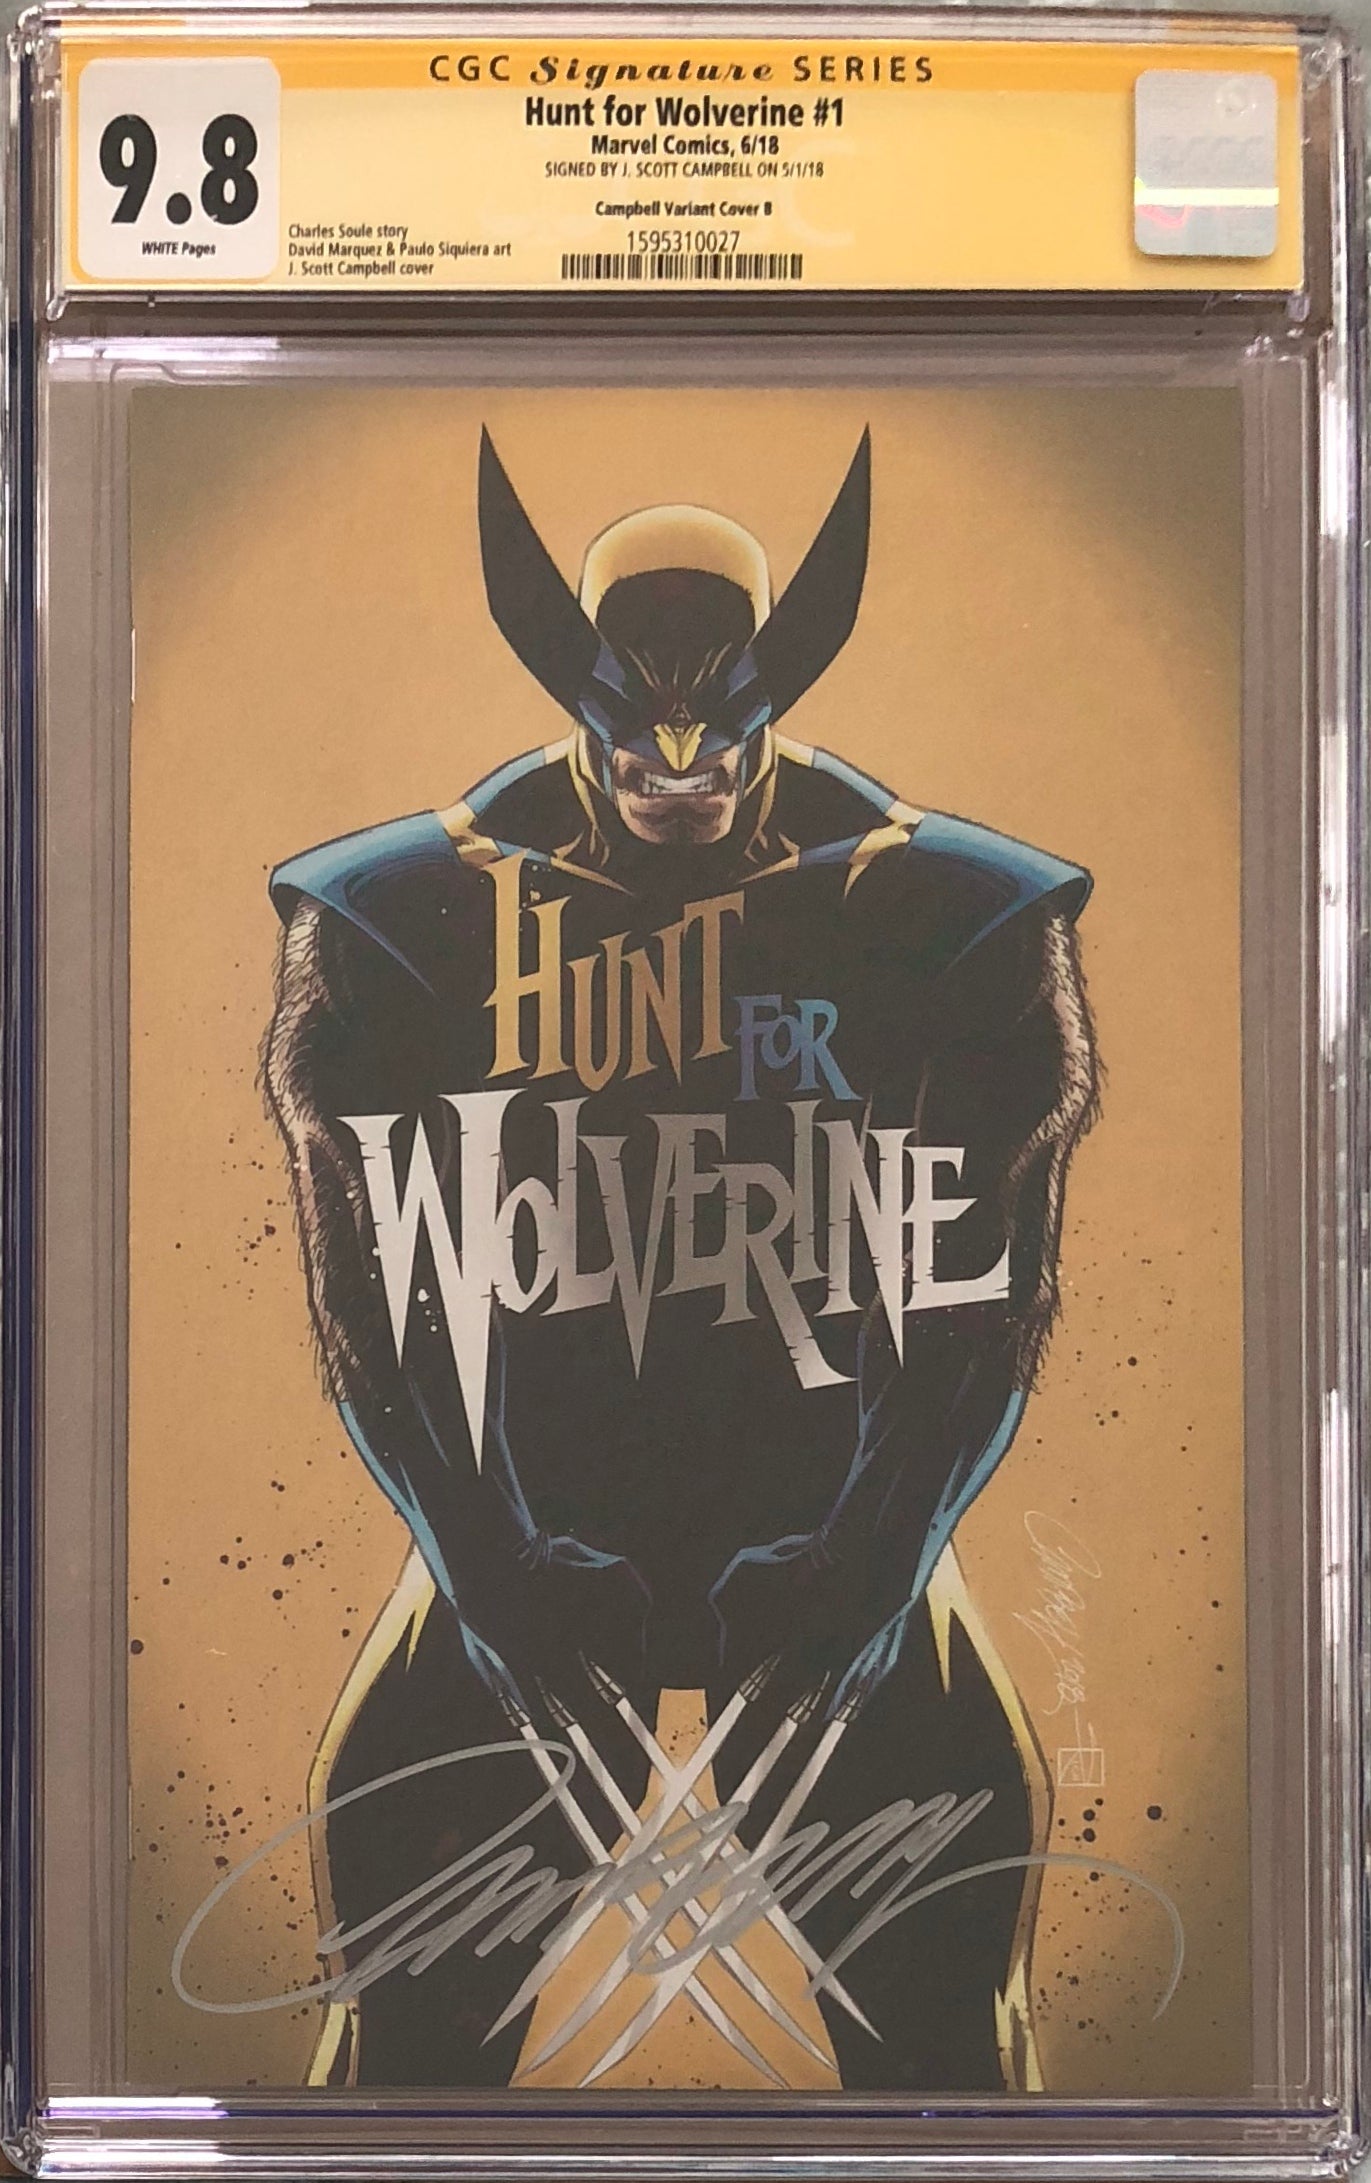 Hunt For Wolverine #1 J. Scott Campbell Calgary Expo "Yellow" B Virgin Exclusive CGC 9.8 SS